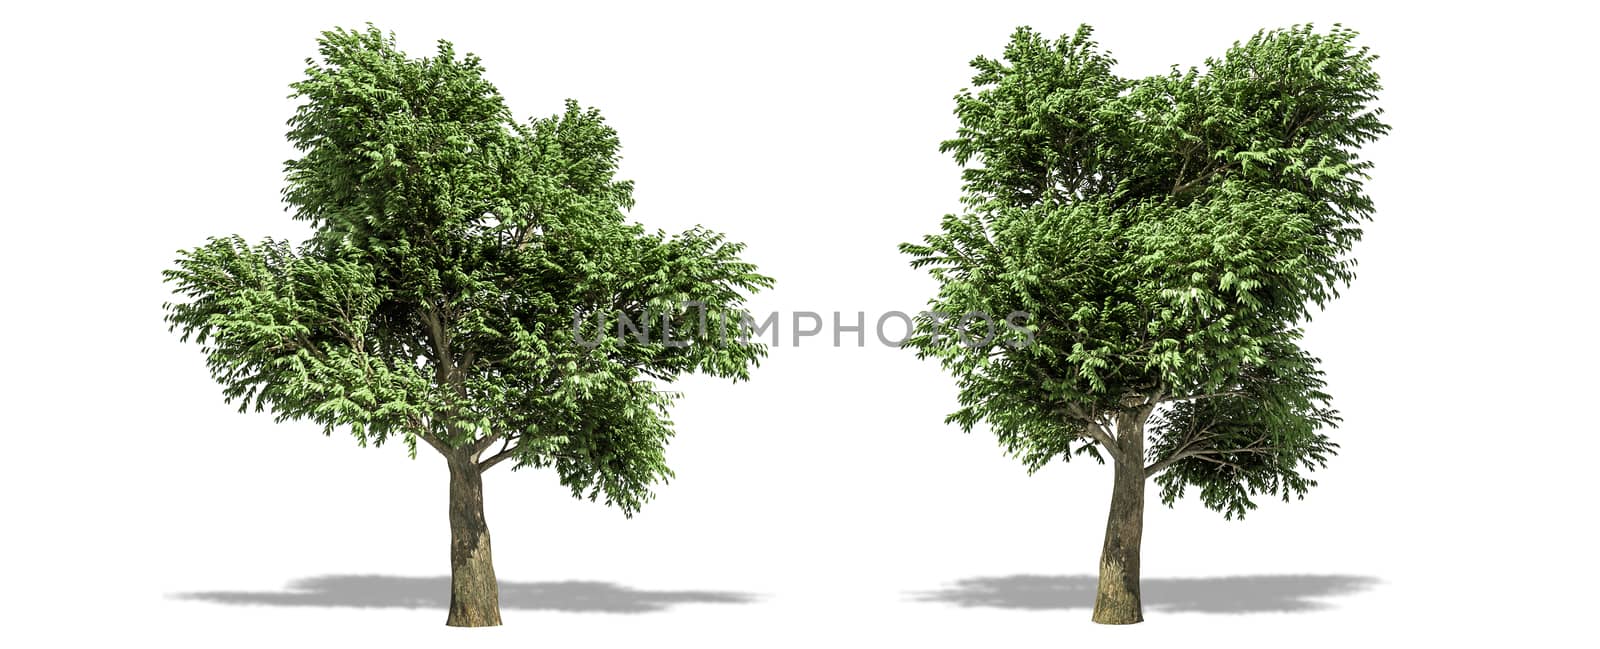 Beautiful Arbutus menziesii tree isolated and cutting on a white background with clipping path.